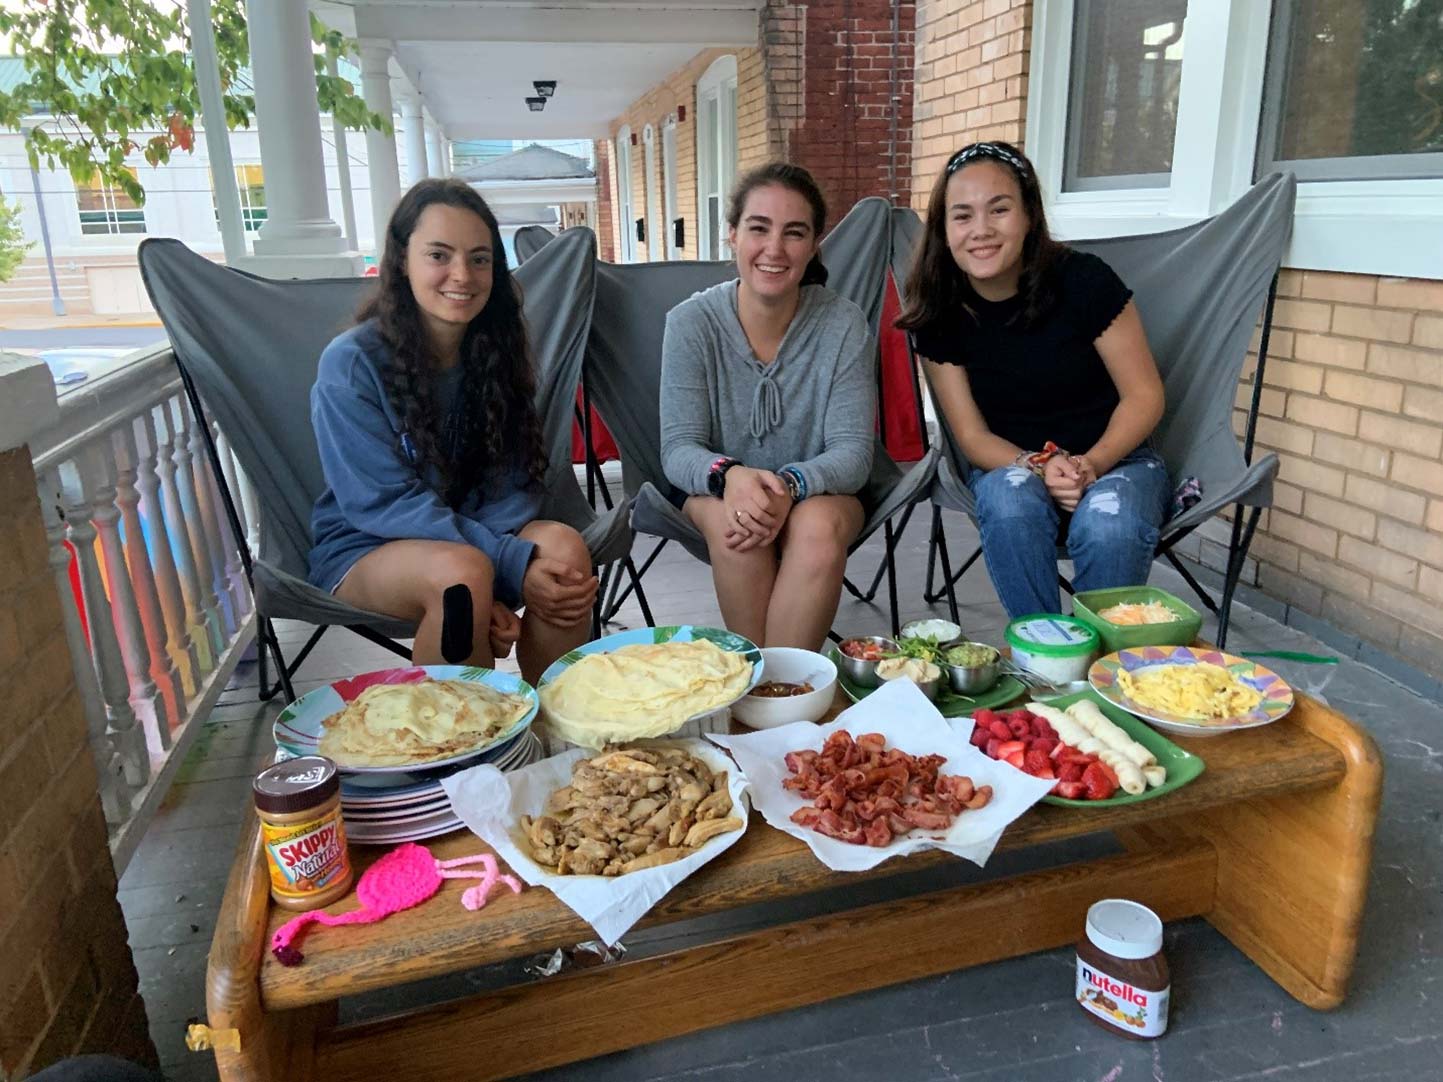 Rachel Hurley ’23, Anna Radcliff ’23 and Kellie Kottman ’23 sit on a couch behind a table filled with food at the Global Foods House in the Monroe Neighbhorhood.